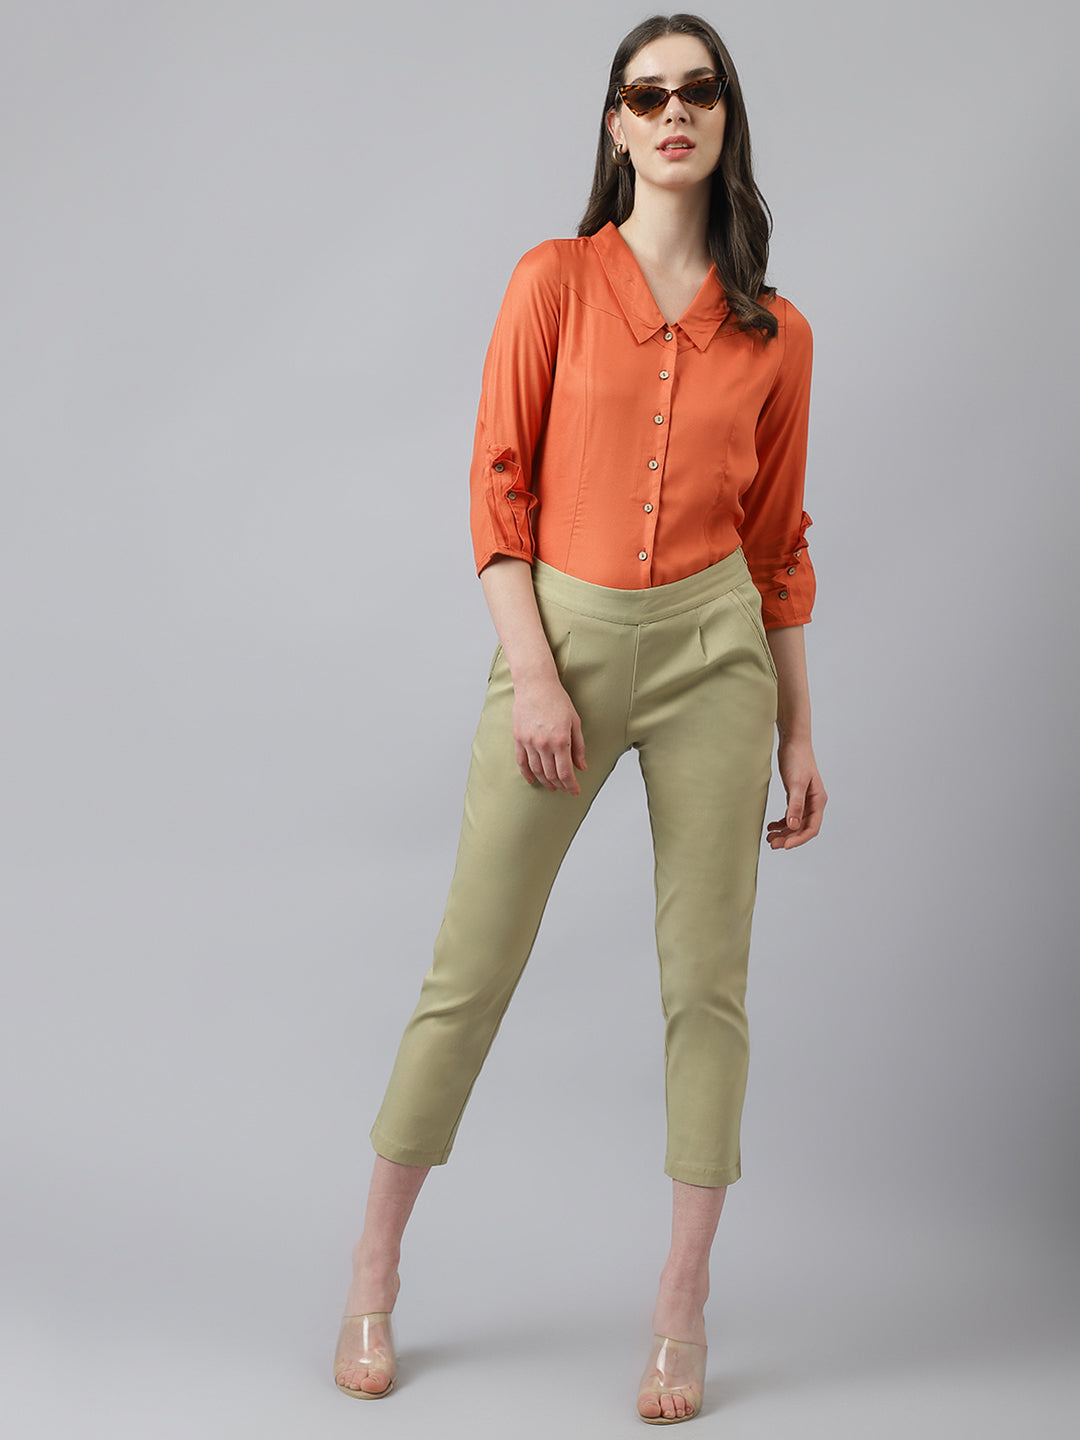 Orange Solid Shirt Top With Detailed Sleeves & Collered Neck